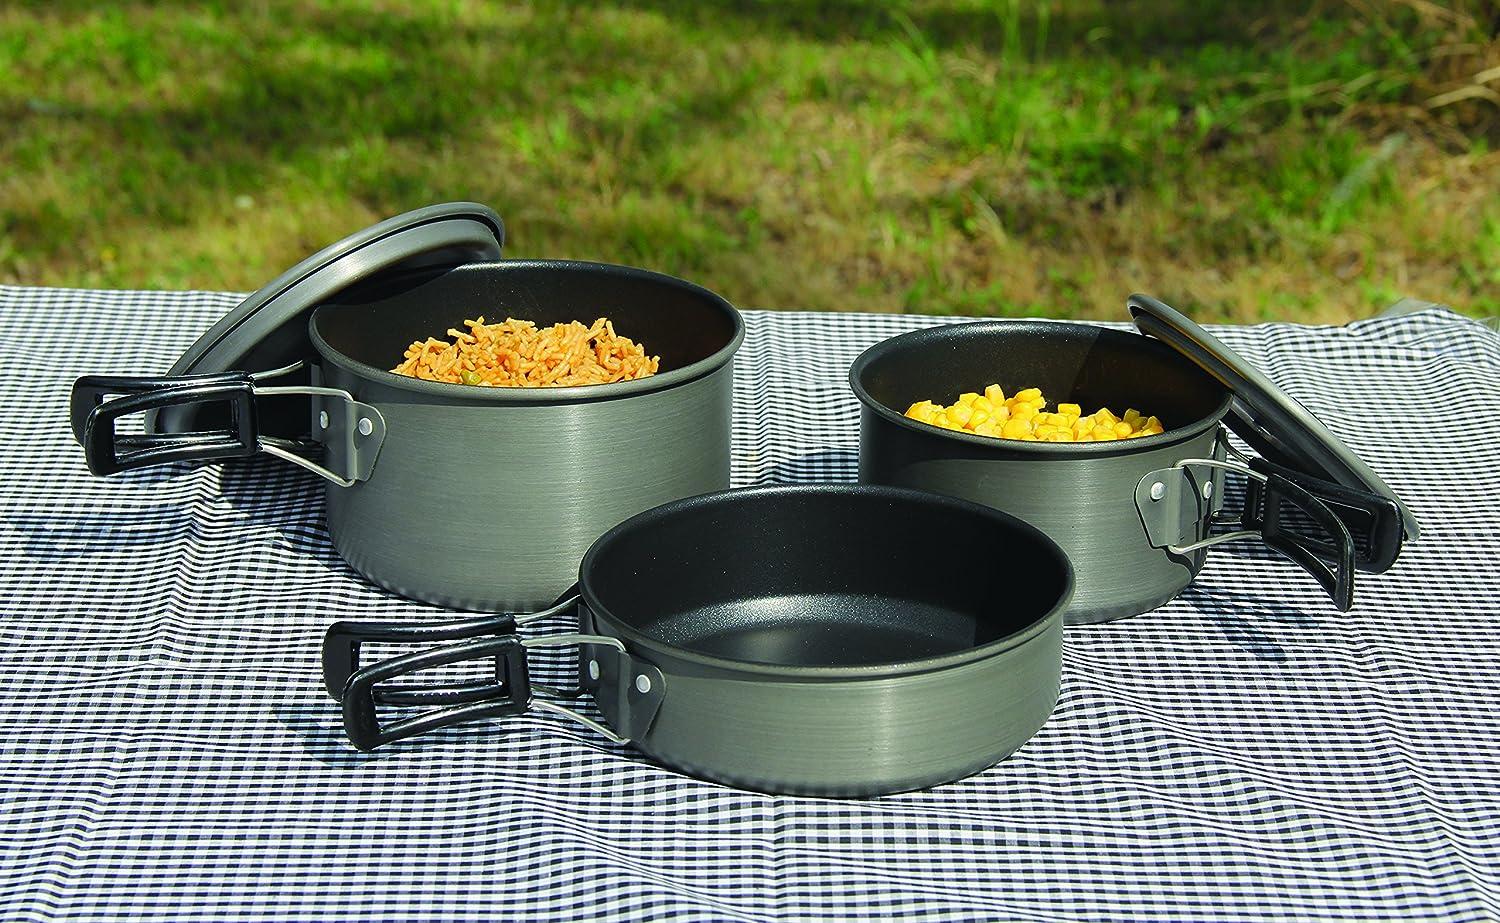 Cast Iron Outdoor Cooking Set, Outdoor Cast Iron Cooking Set